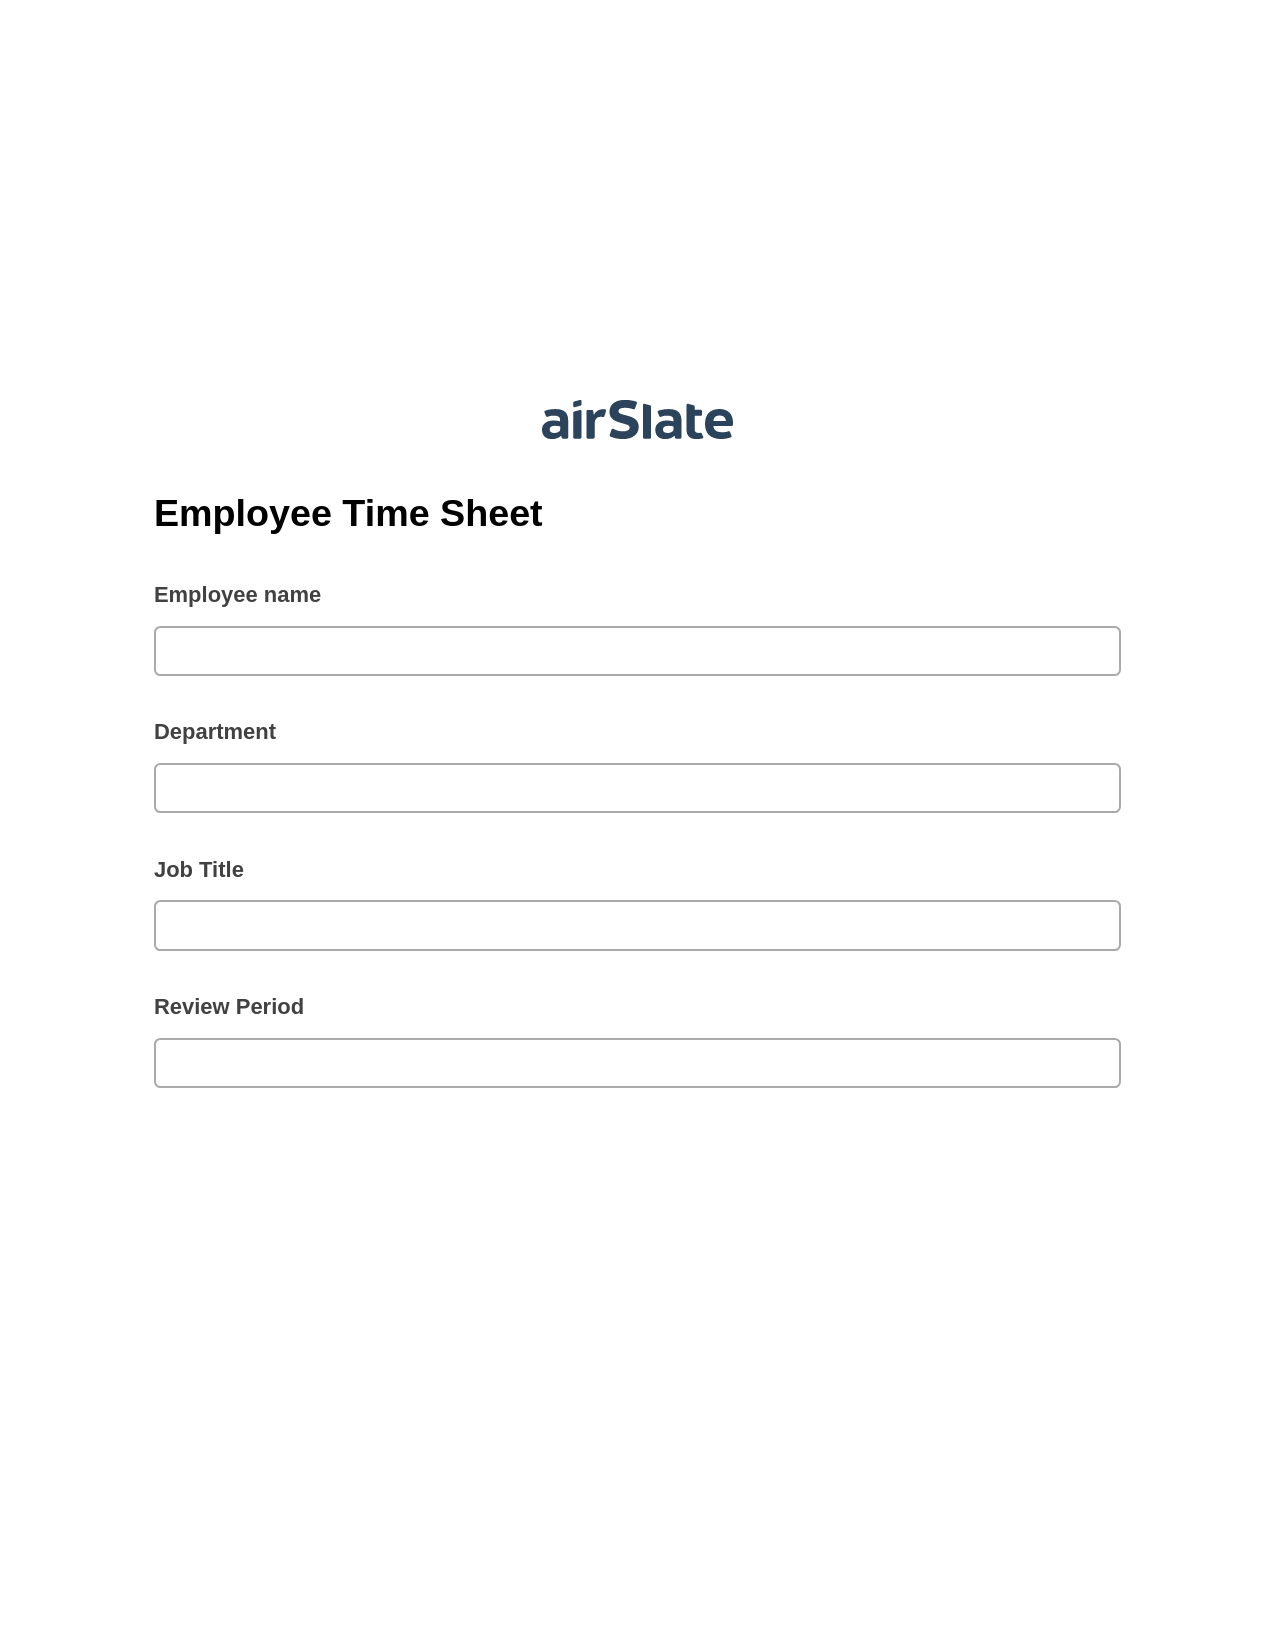 Employee Time Sheet Prefill from NetSuite records, Update Audit Trail Bot, Archive to SharePoint Folder Bot